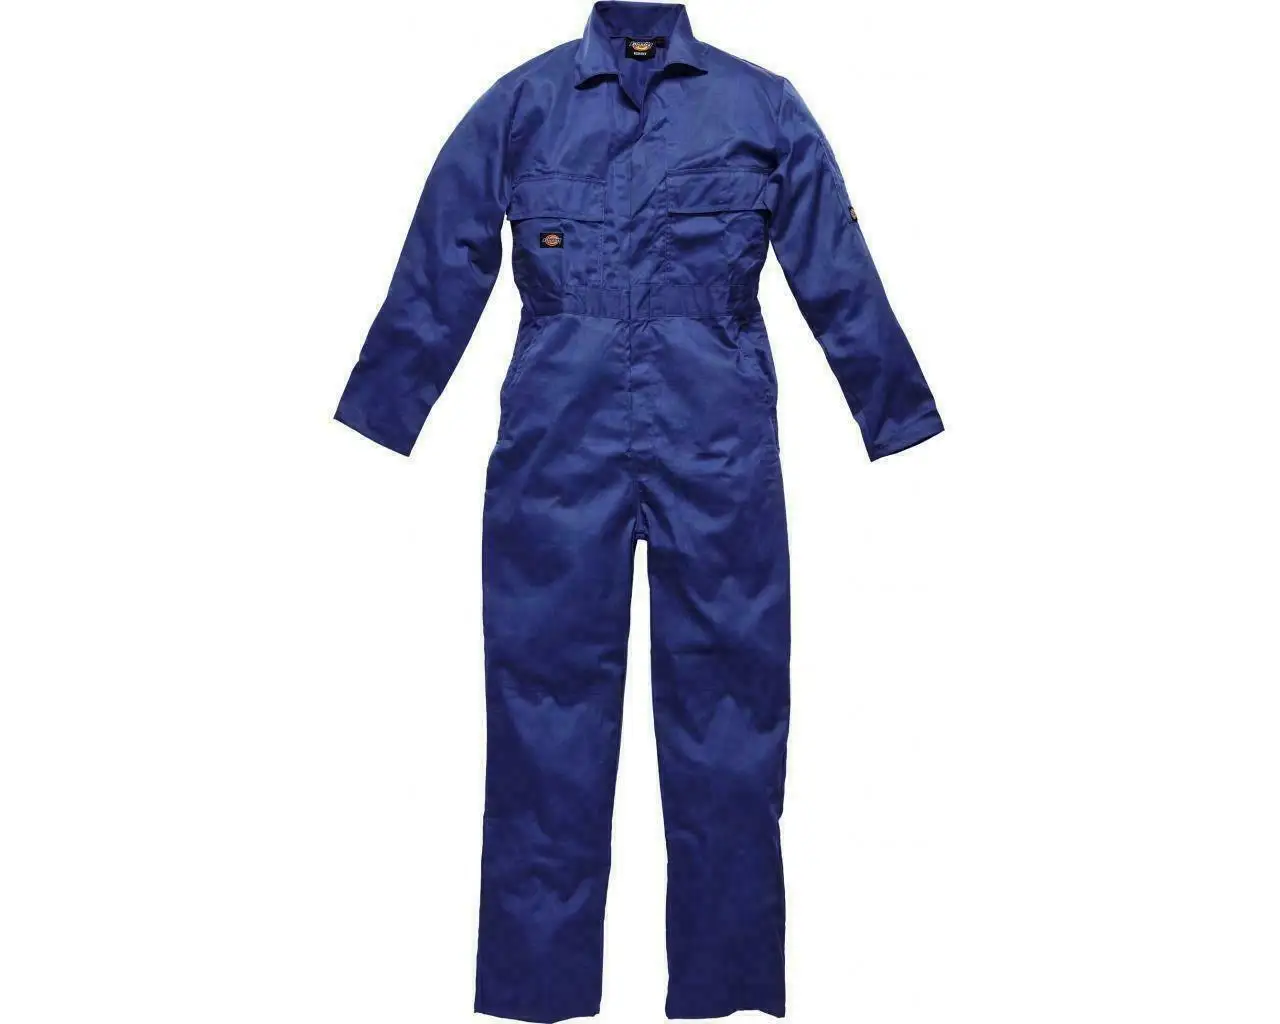 BOILER SUITS WORKER COTTON COVERALL MECHANIC WAREHOUSE WORKWEAR NAVY BLUE SIZES 